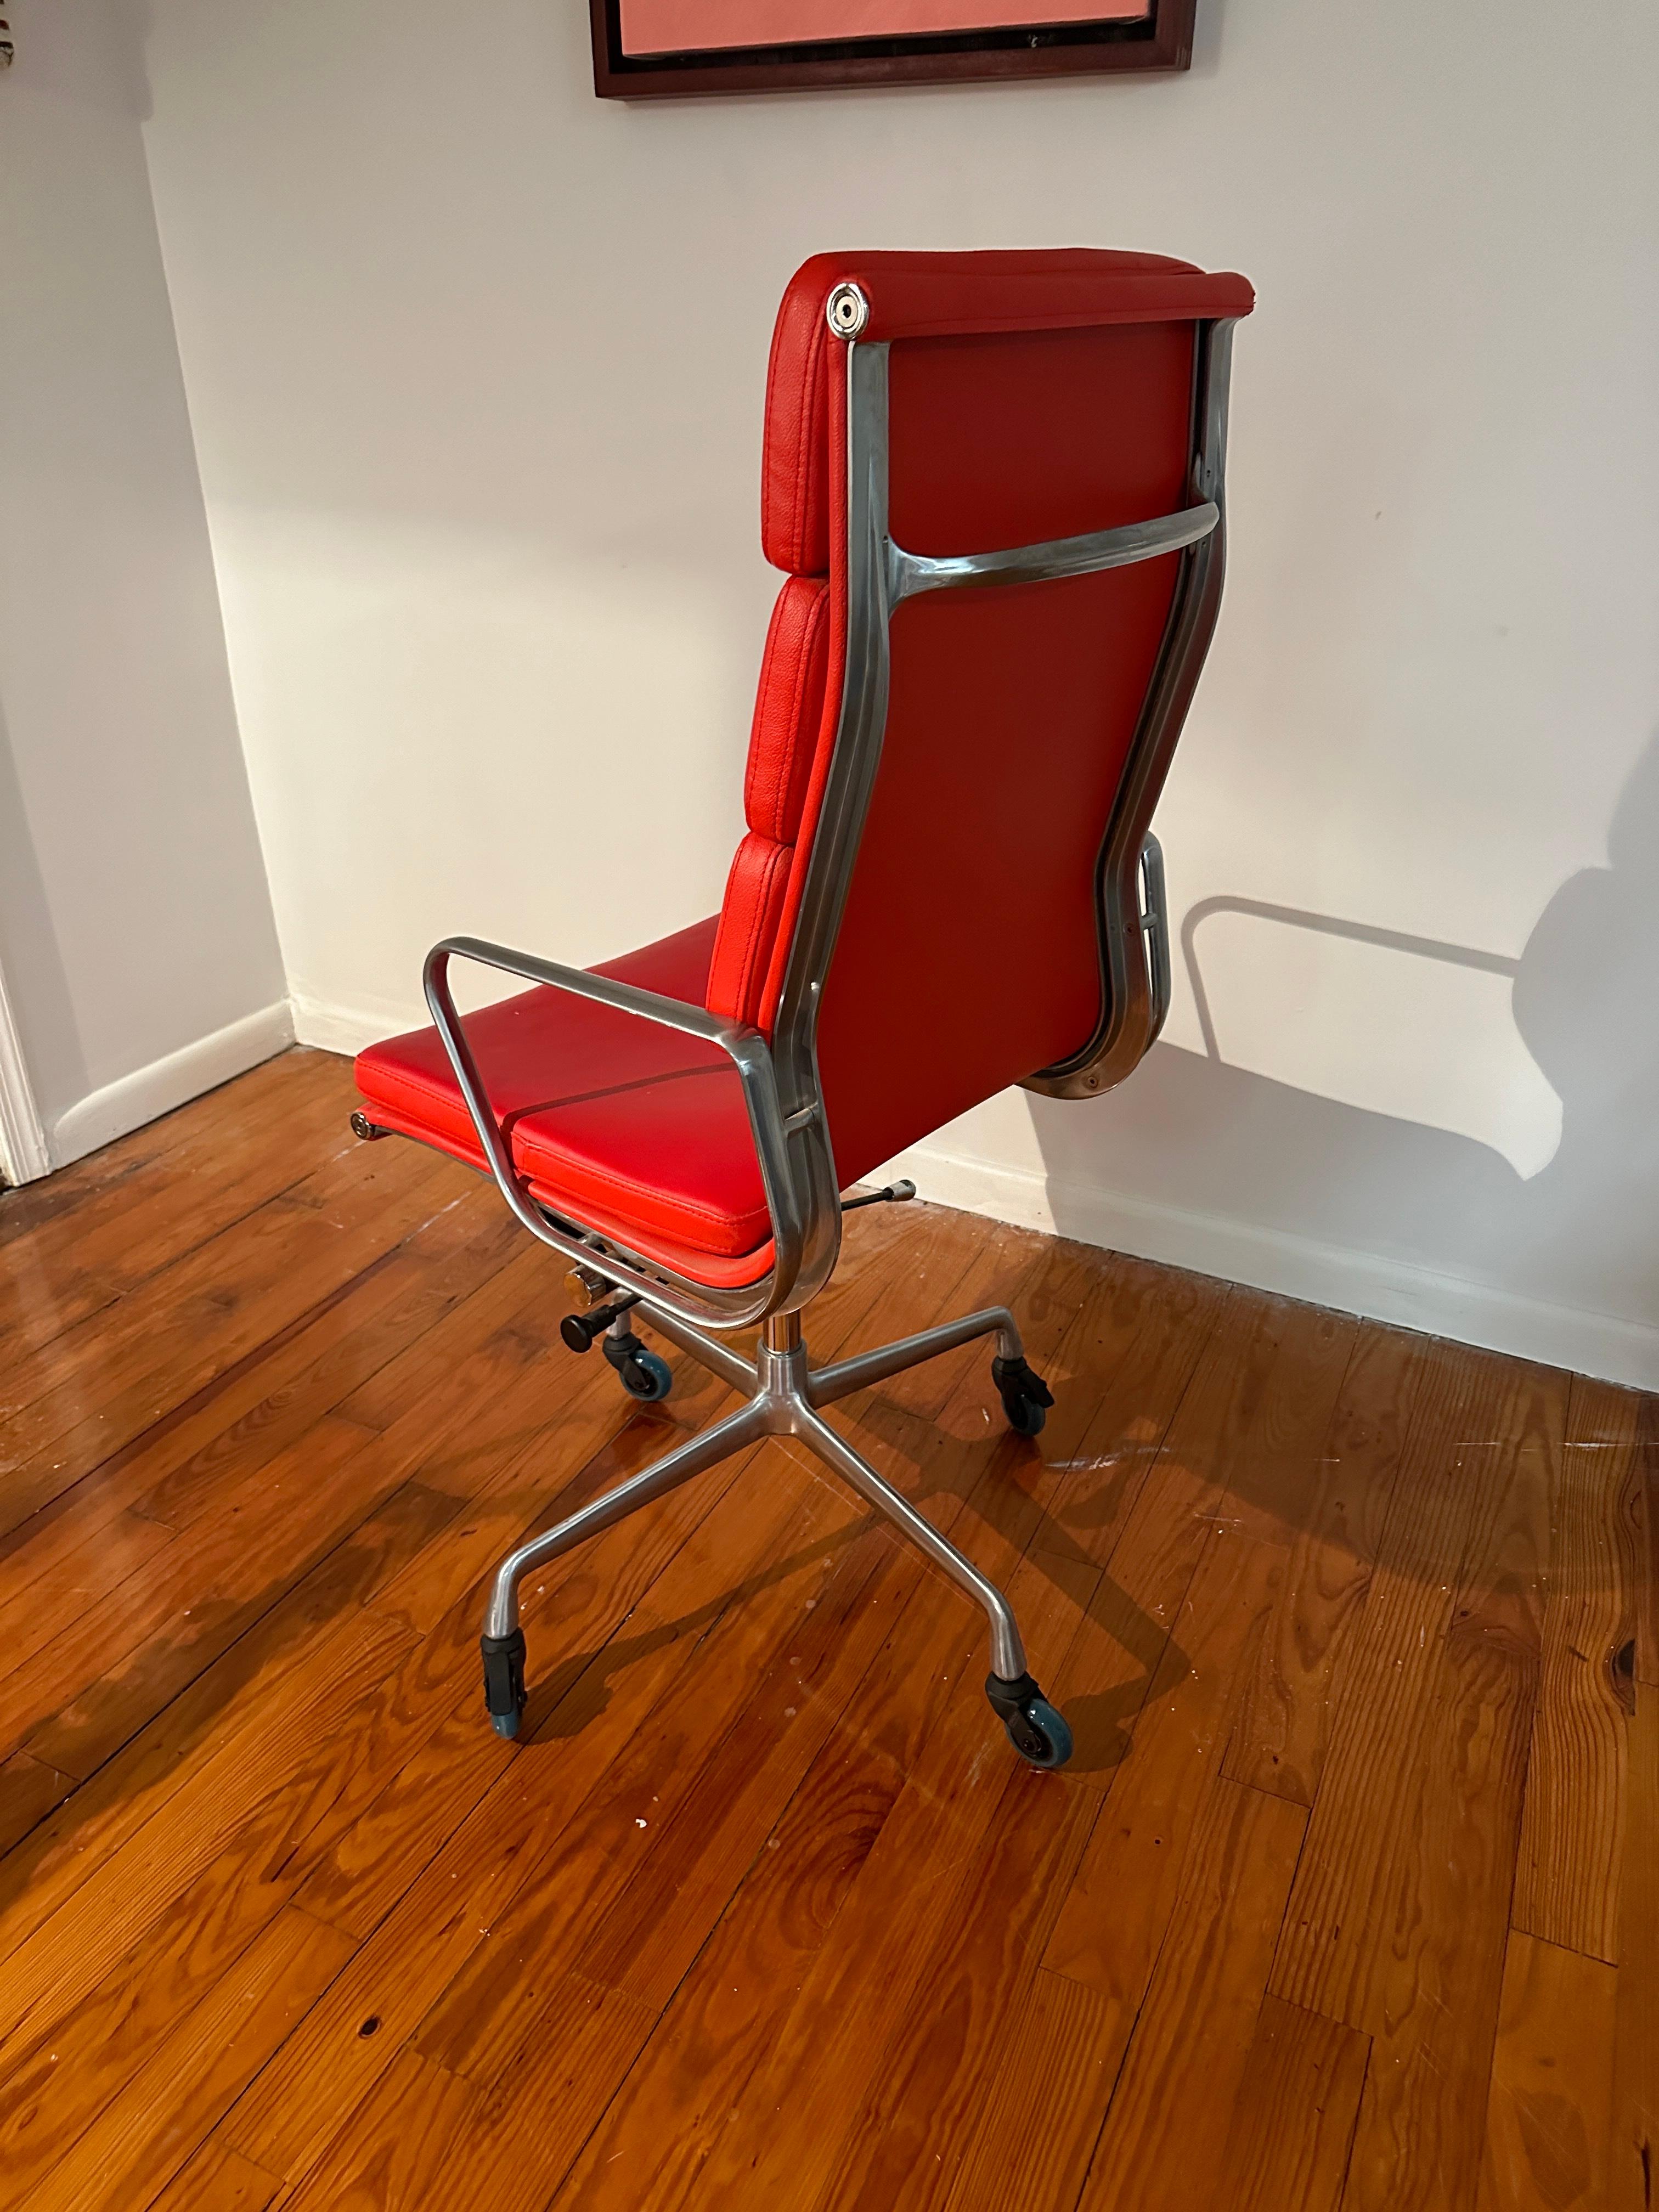 Very good overall condition Eames Style office chair.